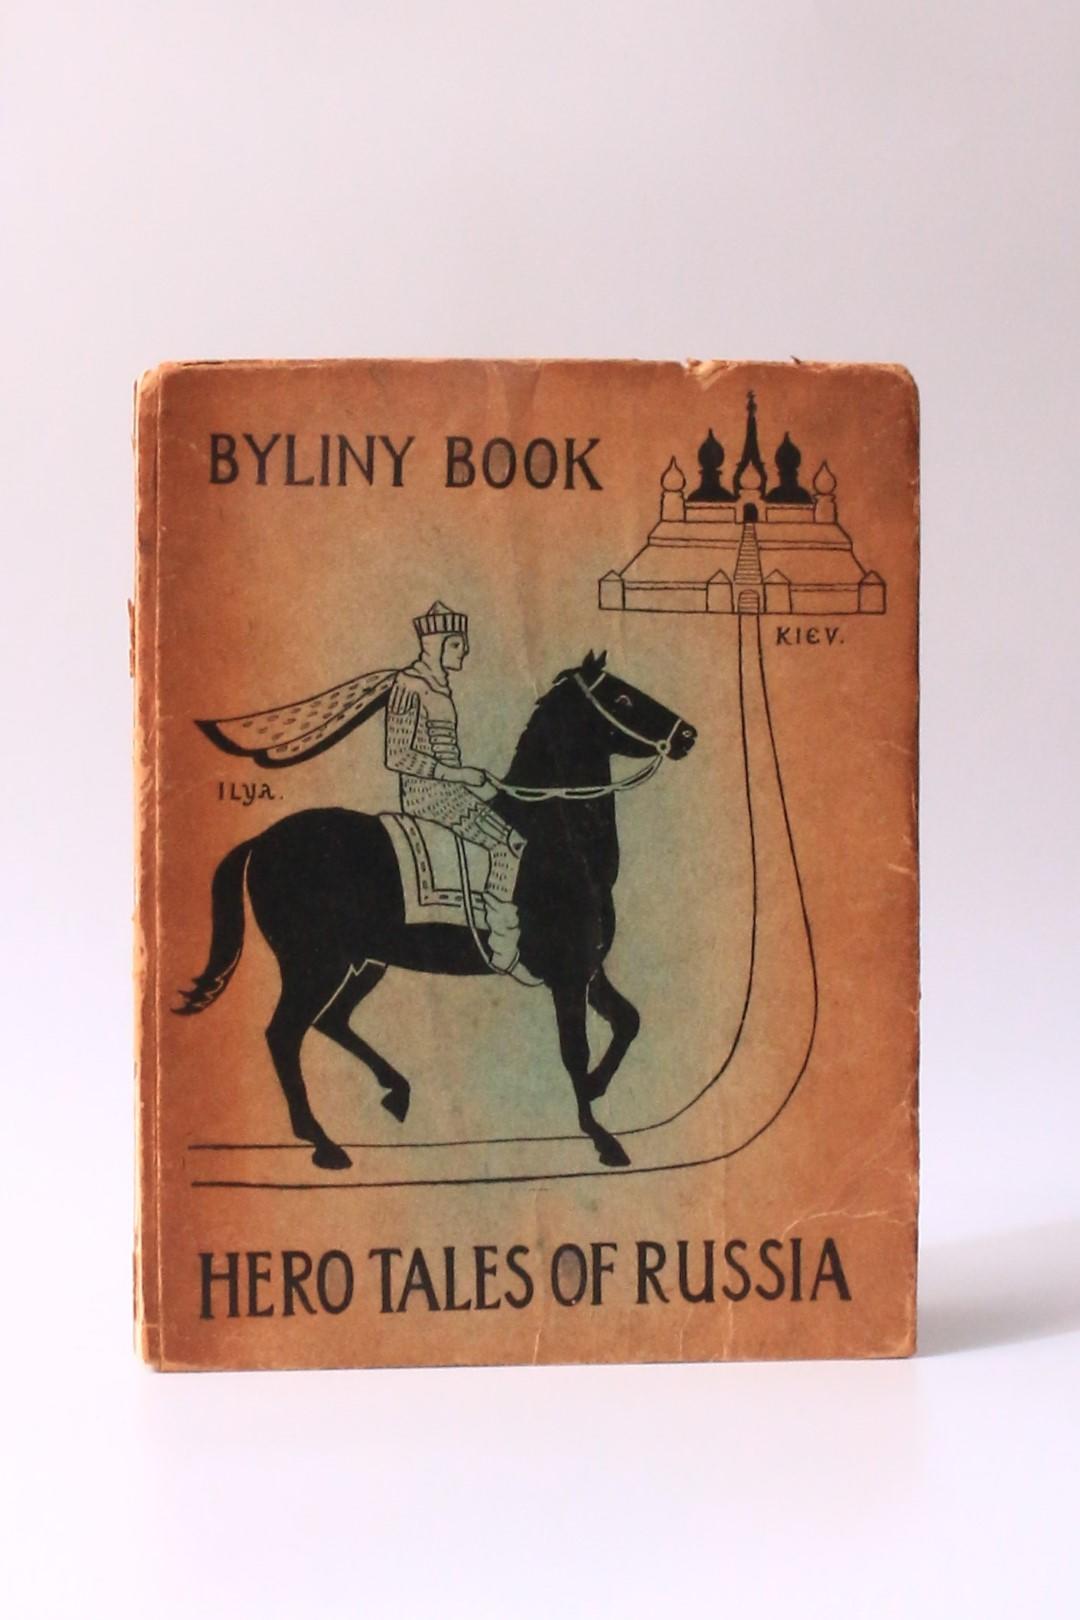 Marion Chilton Harrison - Byliny Book: Hero Tales of Russia - W. Heffer & Sons, 1915, First Edition.